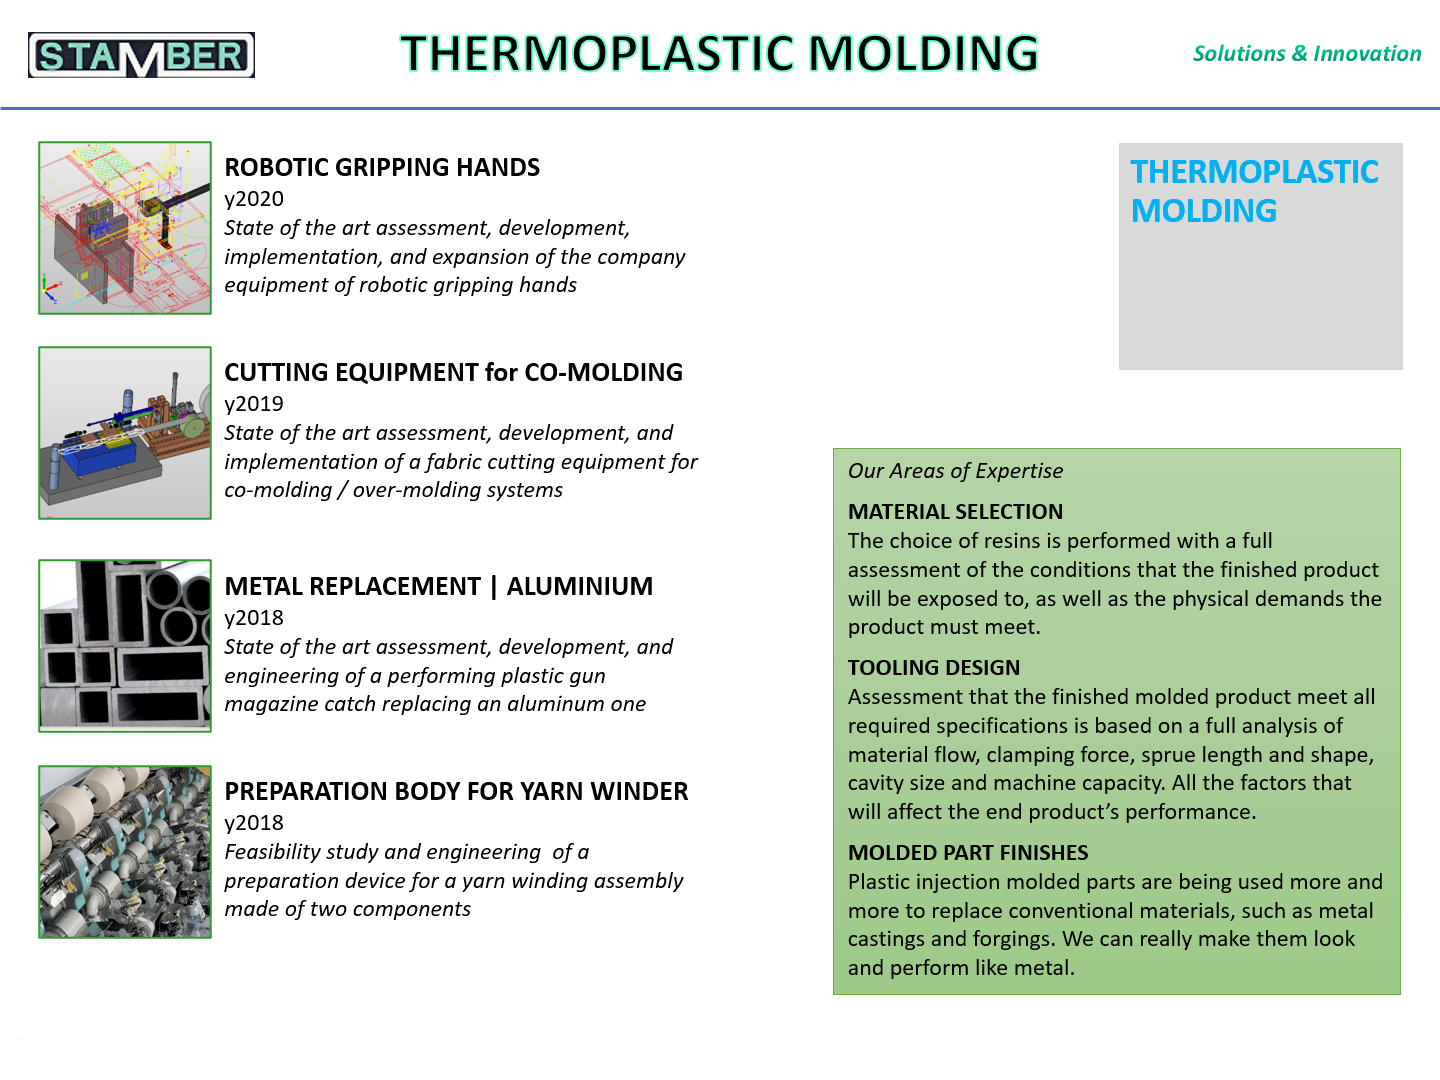 The expertise in Thermoplastic Molding qualifies our offer of Engineering Consulting